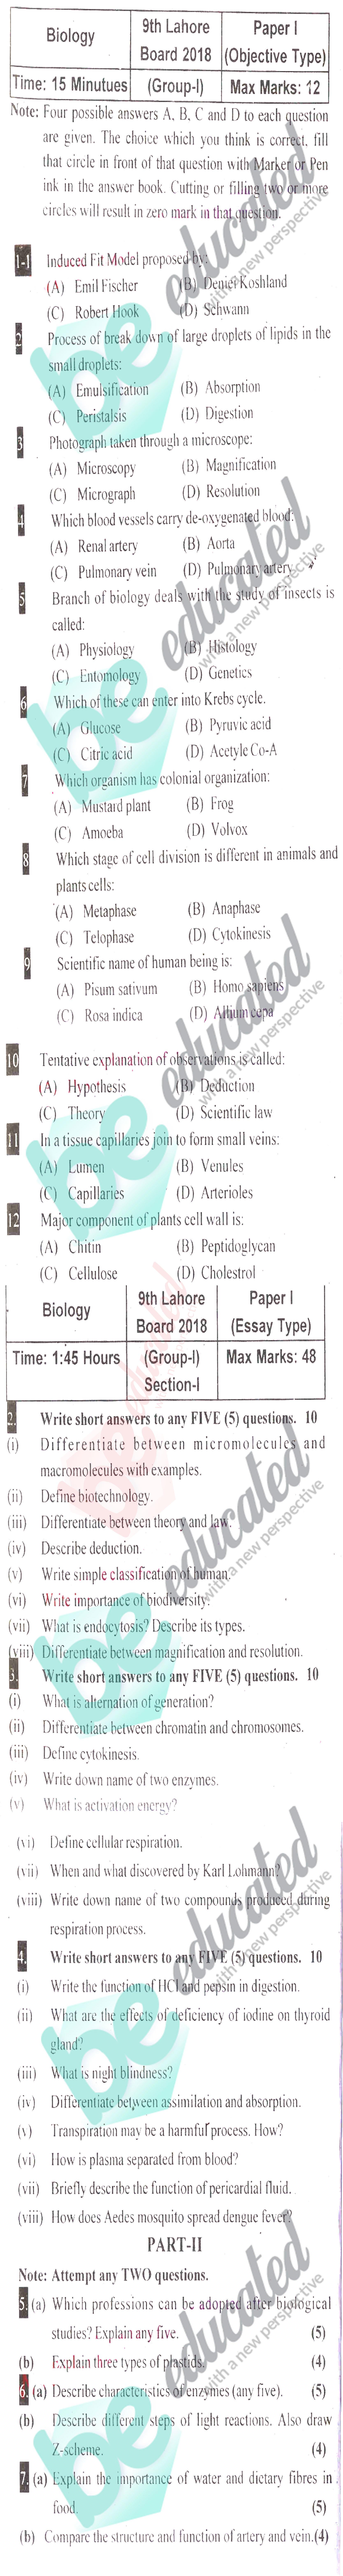 Biology 9th Class English Medium Past Paper Group 1 BISE Lahore 2018